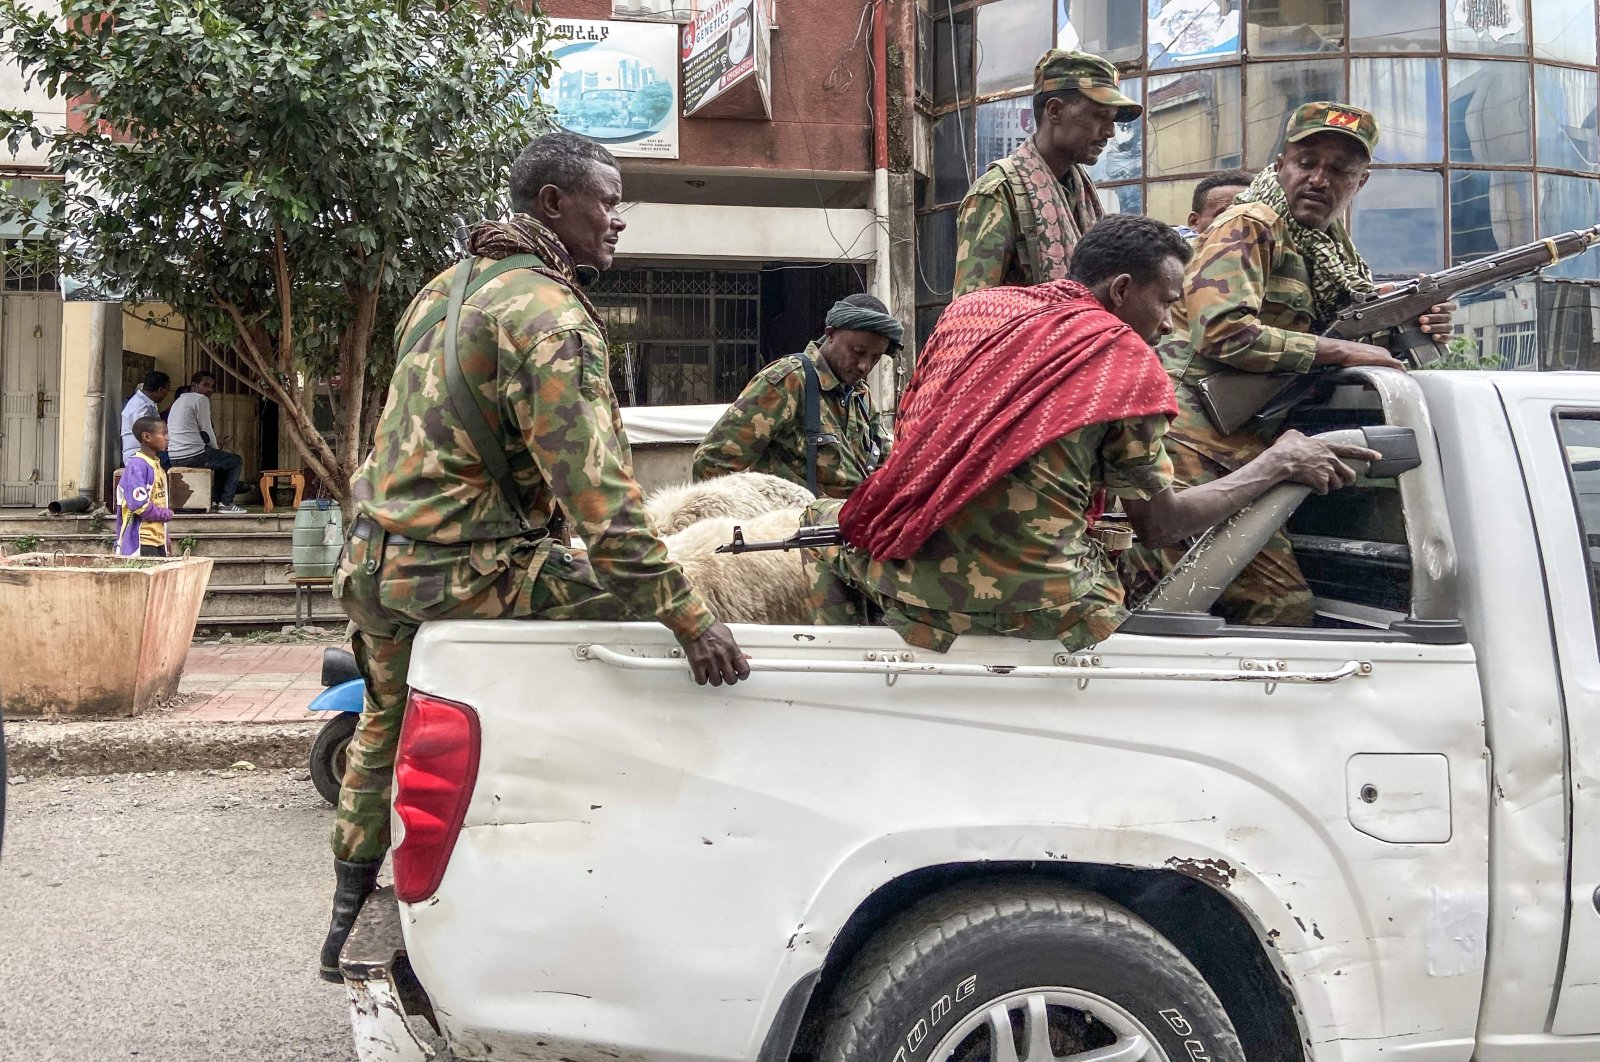 Members of the Amhara militia, which combat alongside federal and regional forces against forces in the northern region of Tigray, ride on the back of a pickup truck in the city of Gondar, Nov. 8, 2020. (AFP Photo)